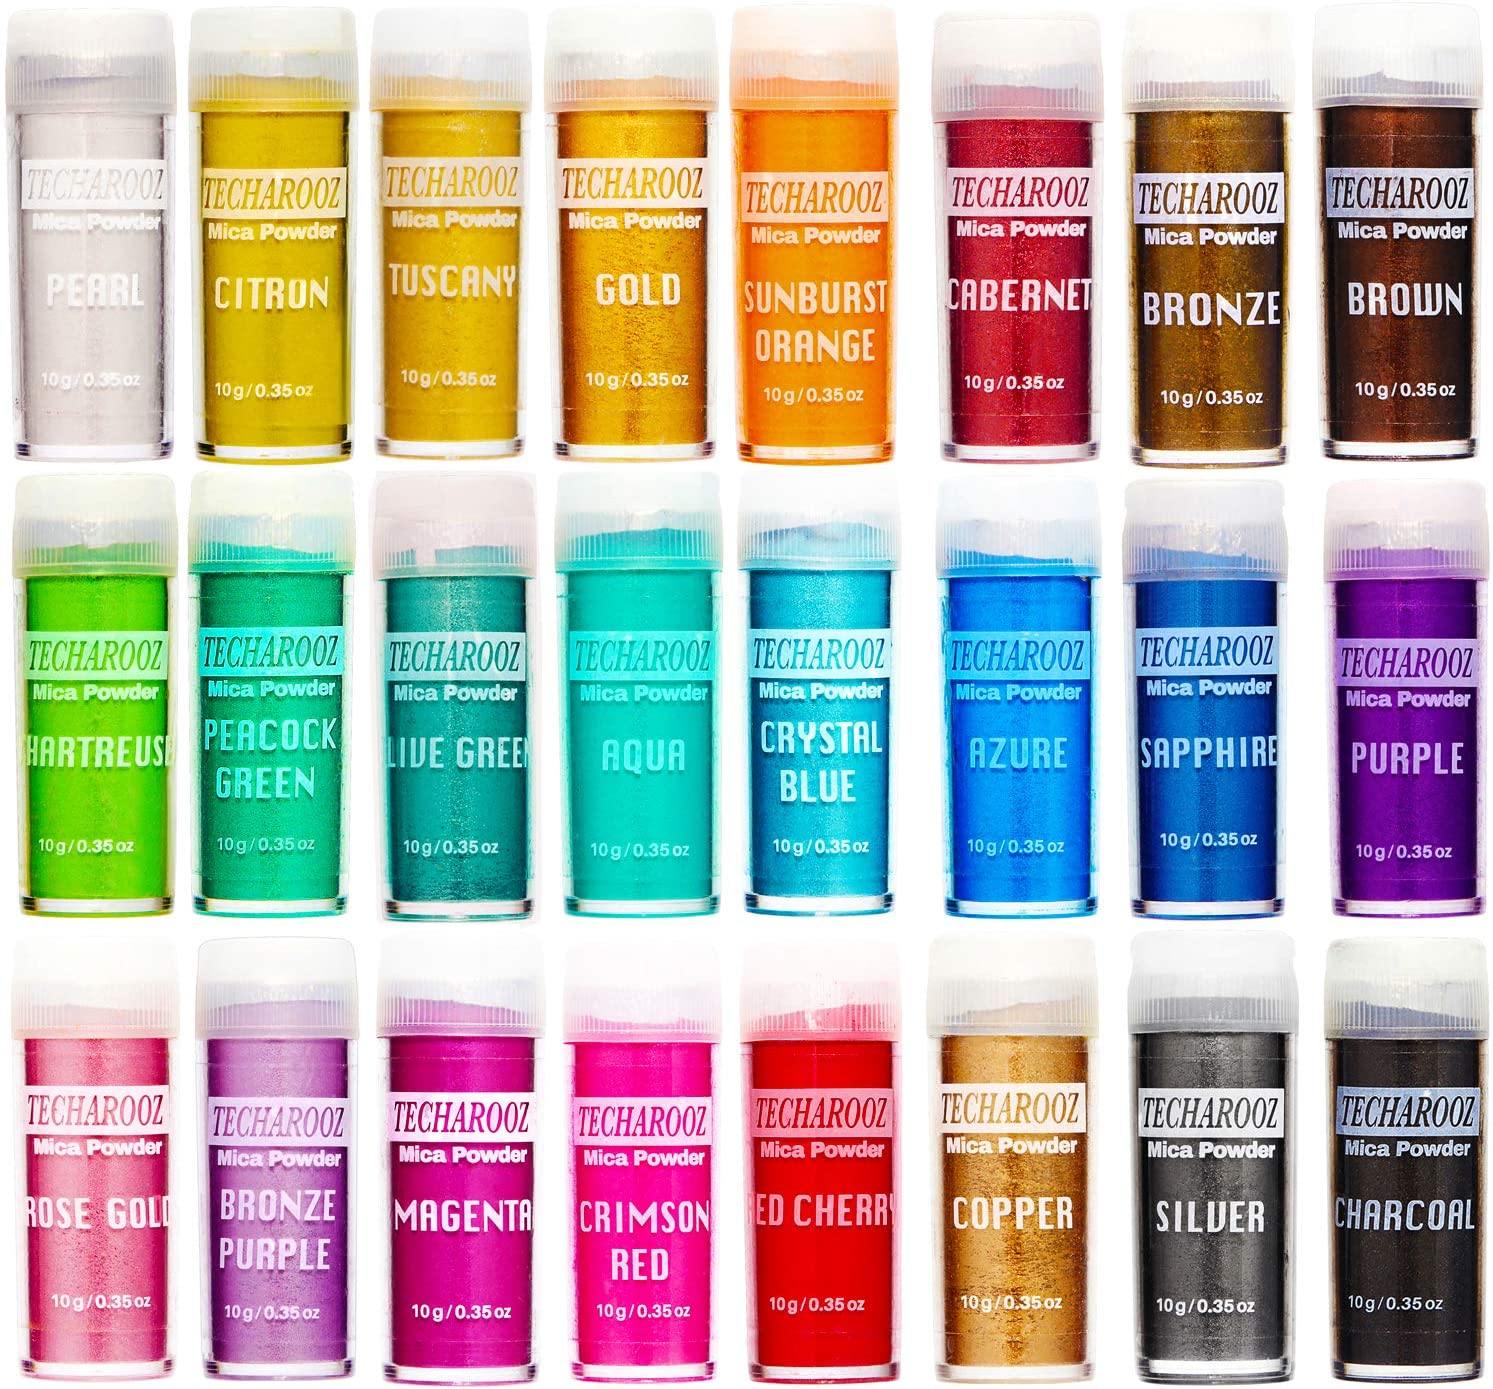 Mica Powder Pigment 24 Colors Set for Epoxy Resin, Soaps